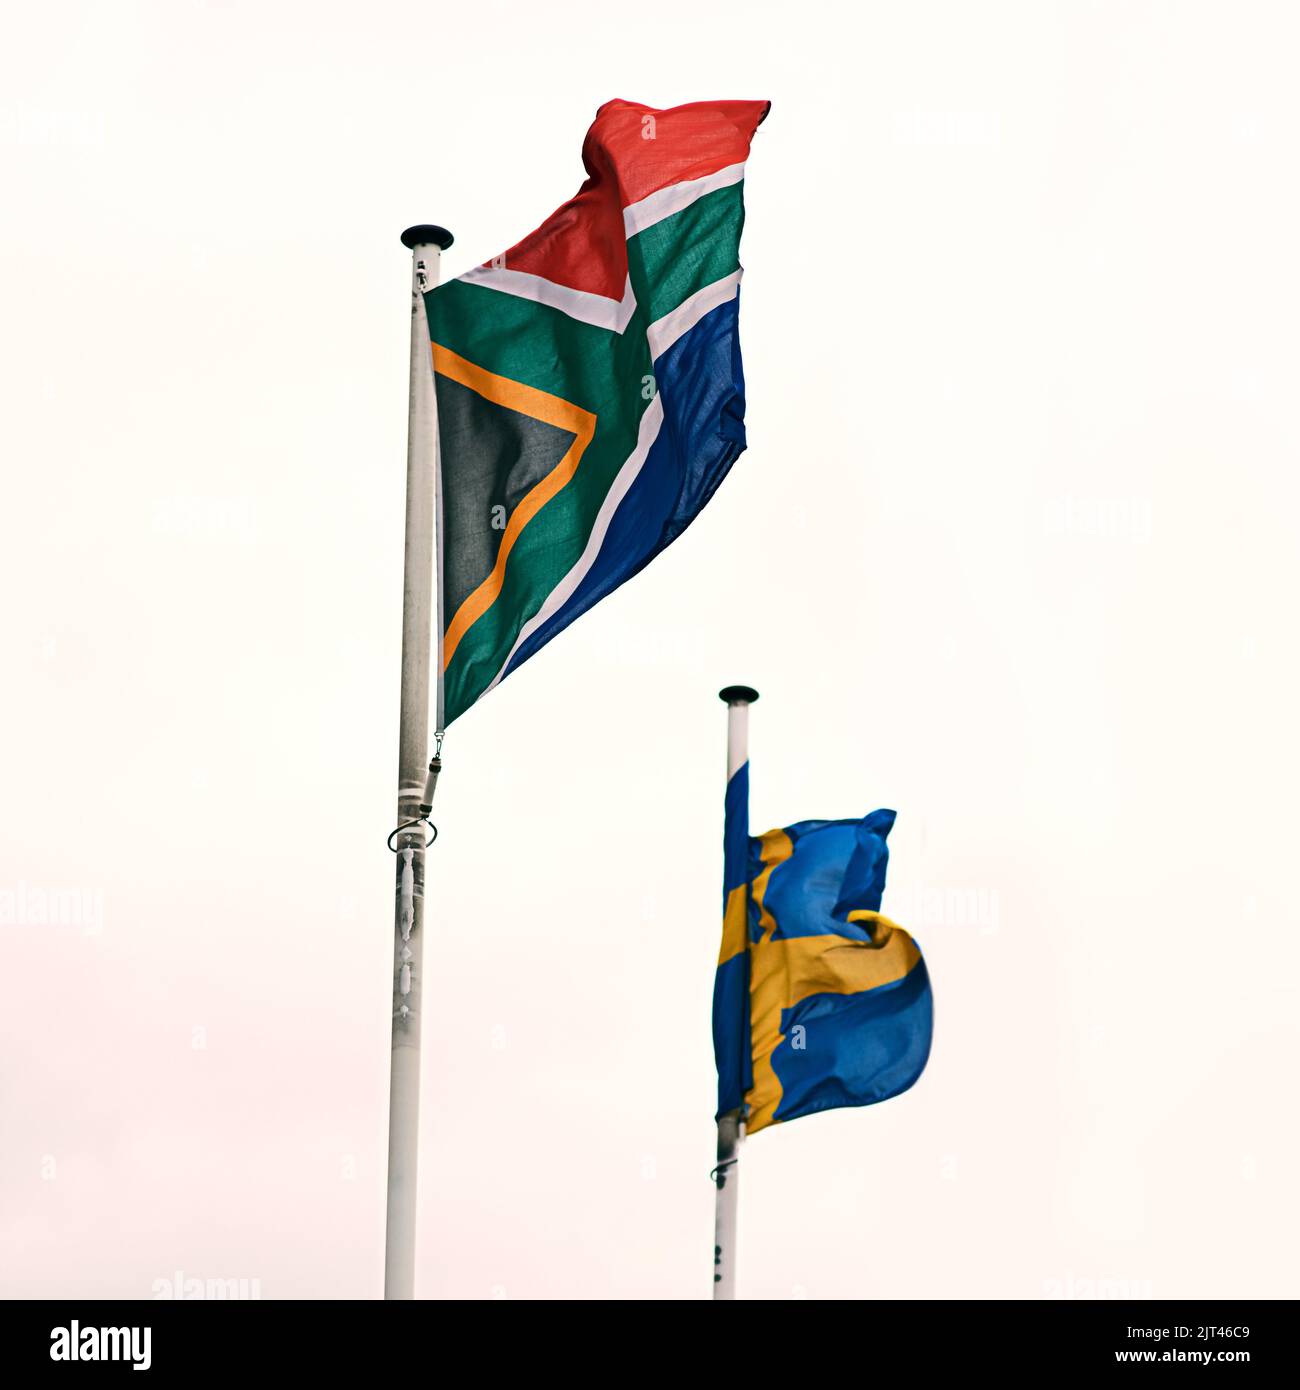 Flying side by side. the South African and Swedish flags blowing in the wind. Stock Photo